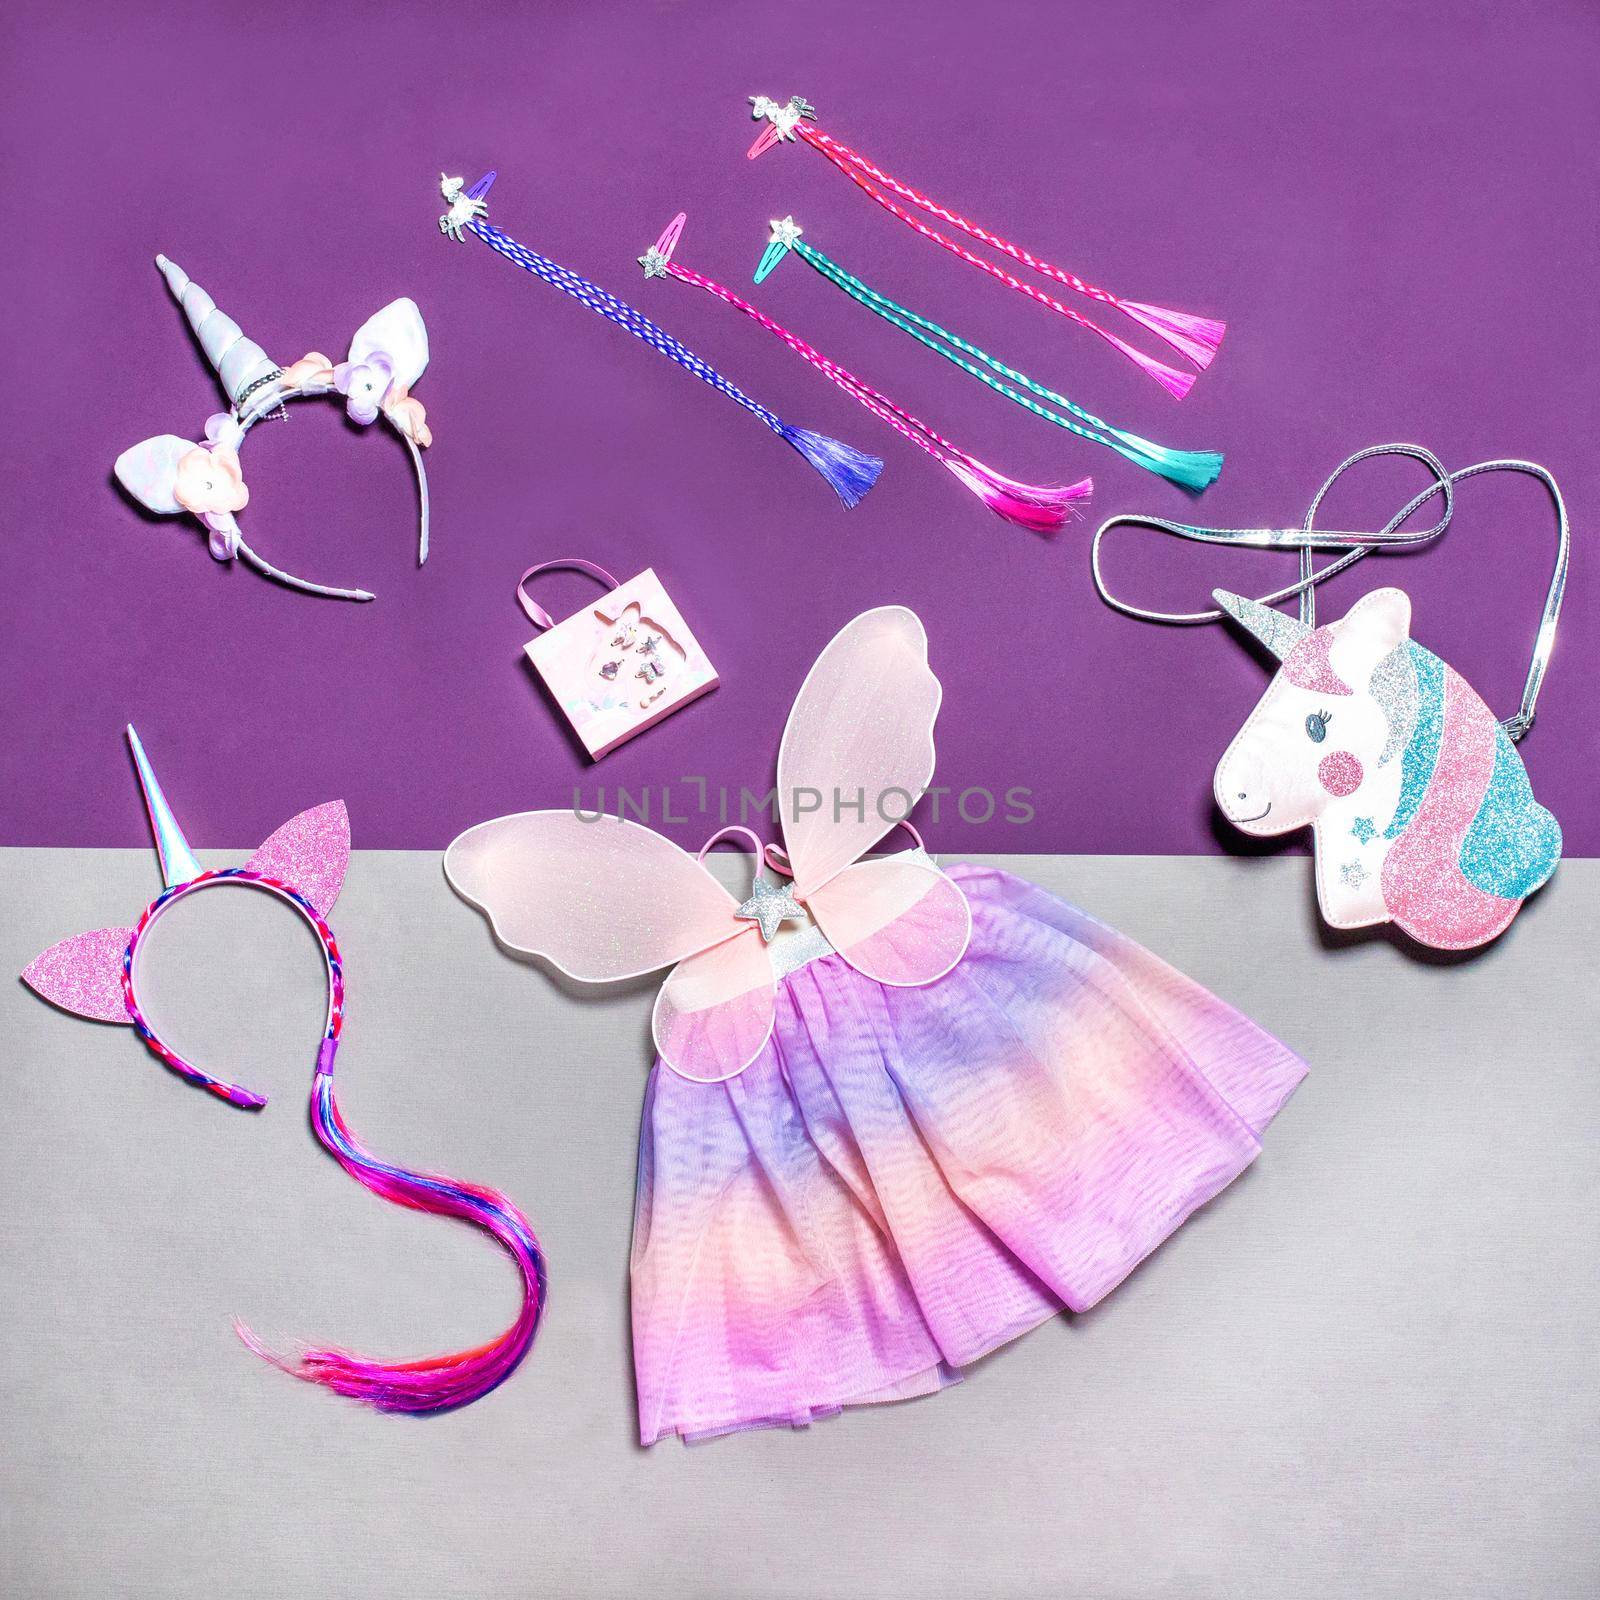 Girl dress accessorize isolated on a purple background by ferhad